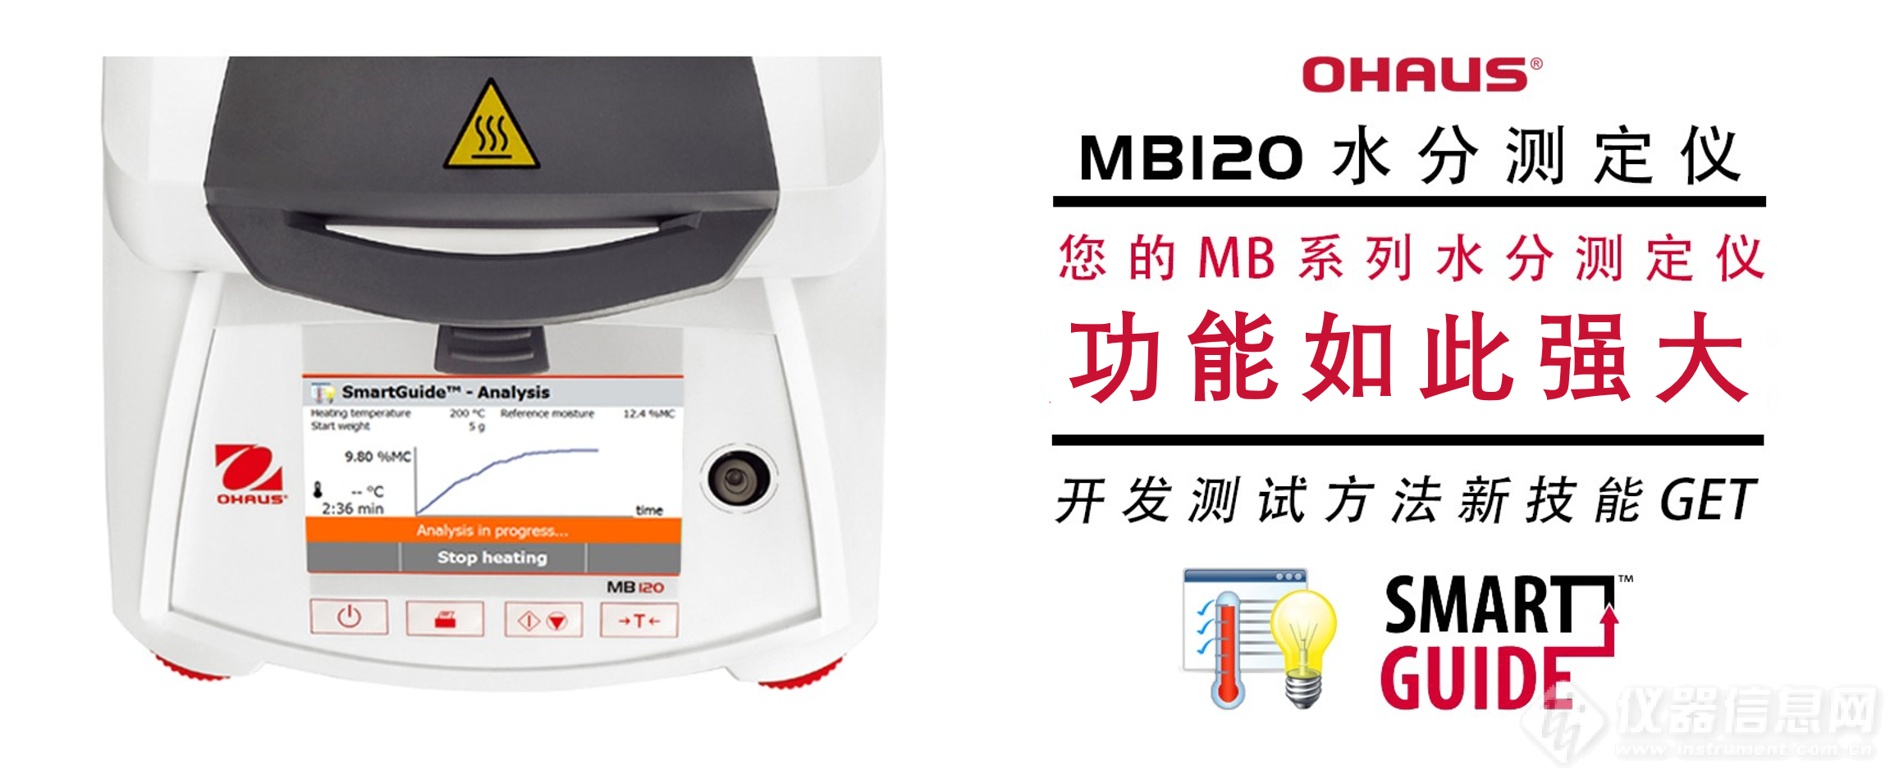 MB120 smart guide宣传Banner.png